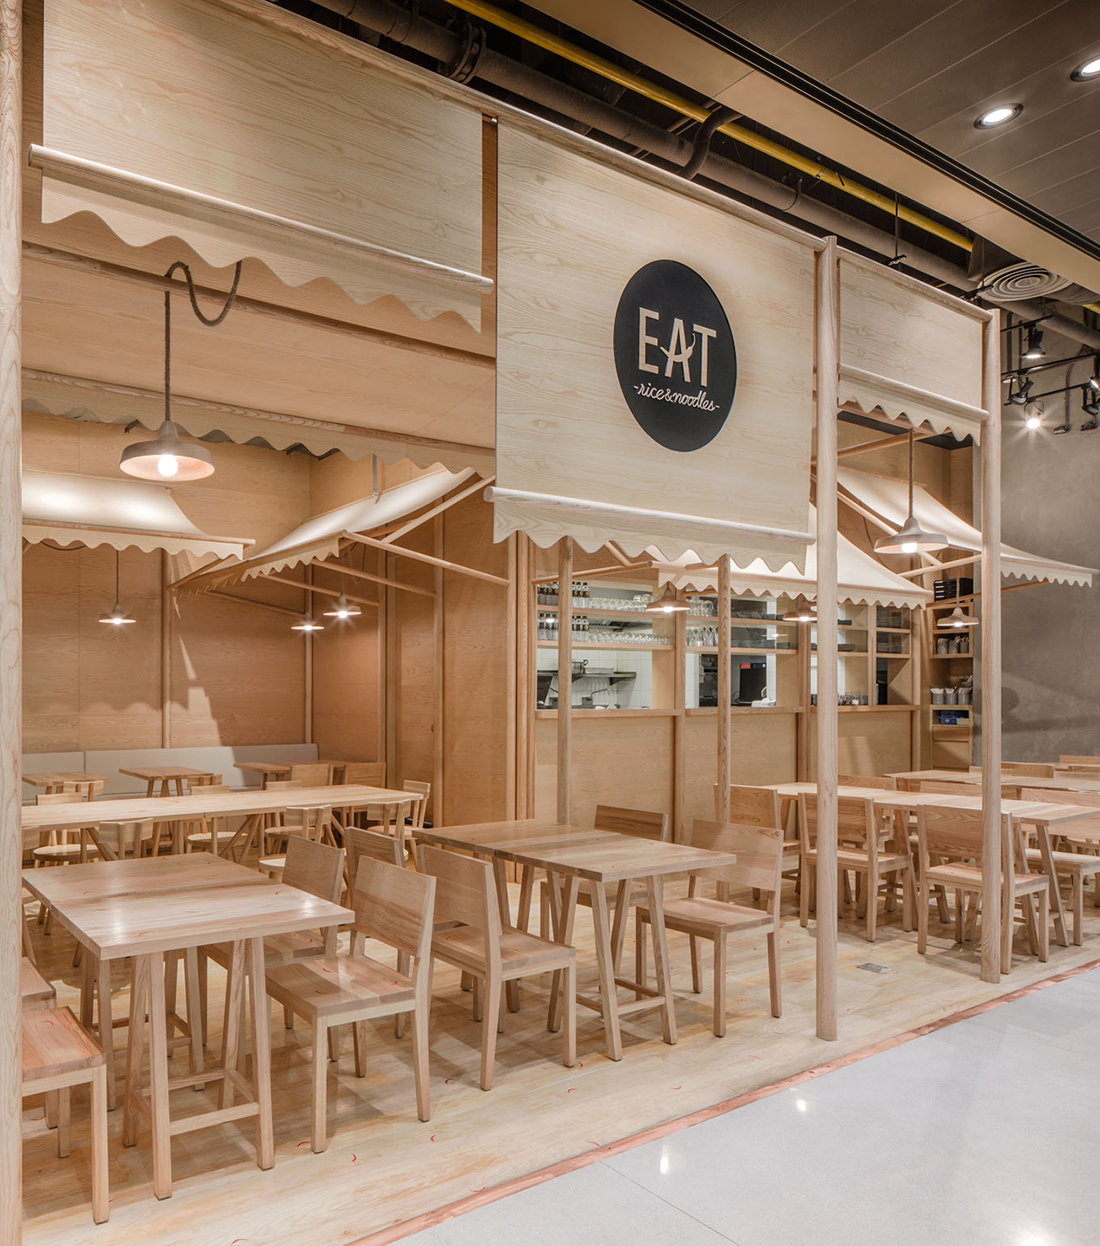 Wood Chipping: Onion Designs All Wood Eatery at Emquartier — KNSTRCT